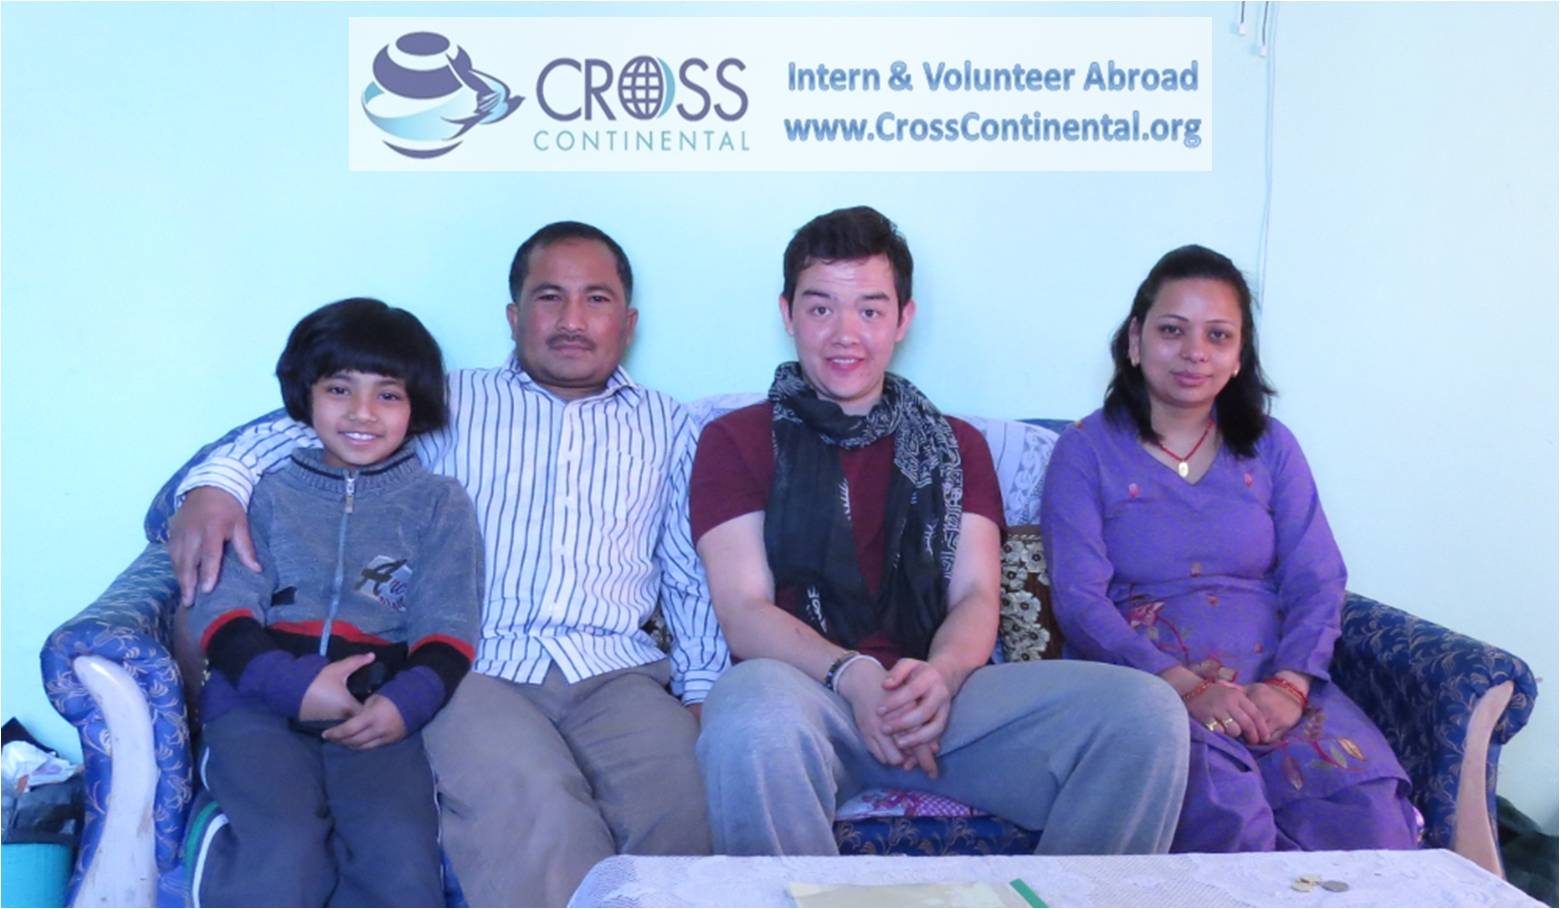 Medical Internships Abroad and Cultural Immersion with Host Family